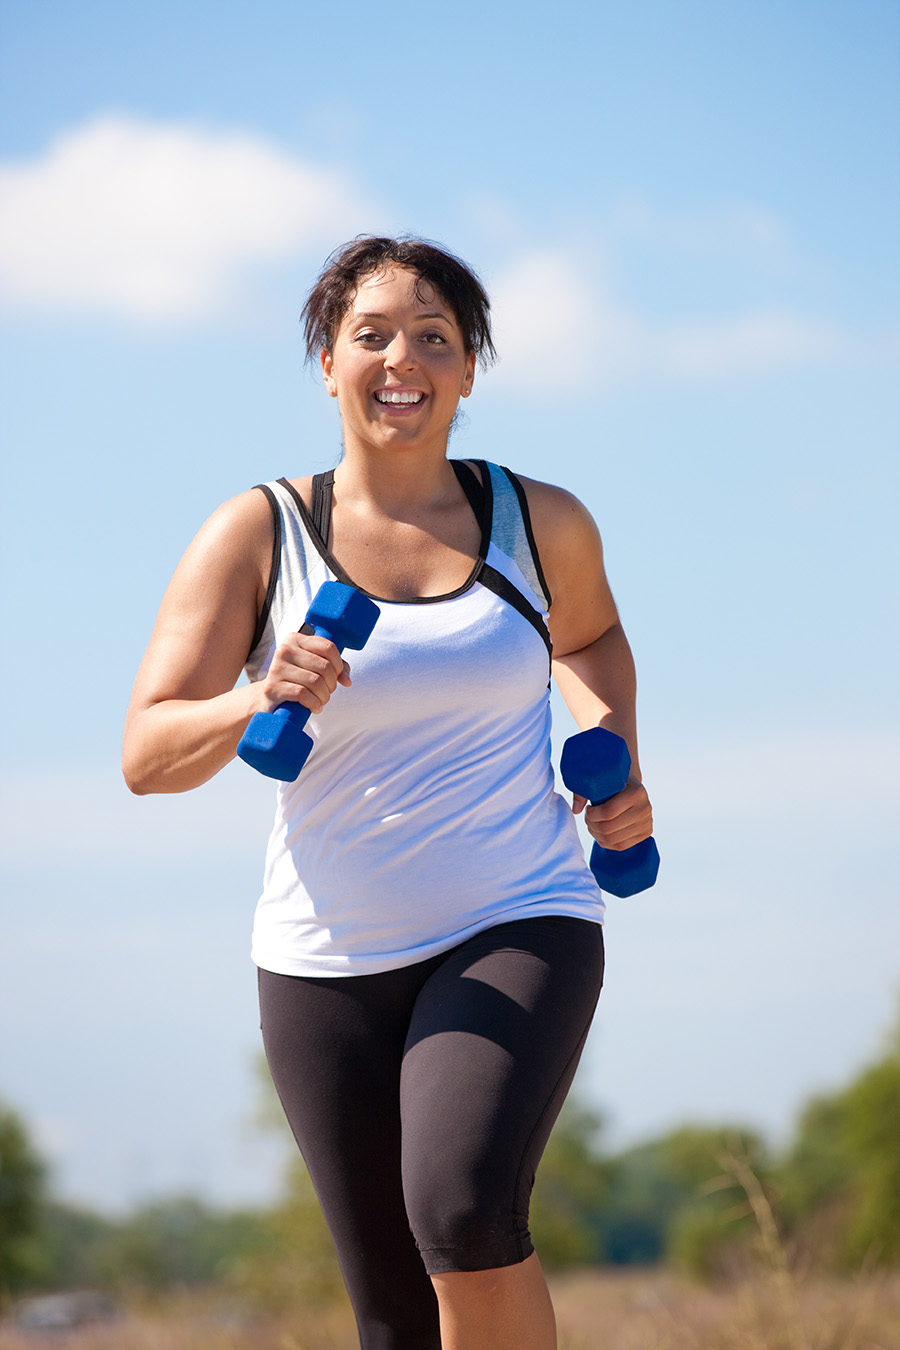 Color image of a smiling woman running with weights.